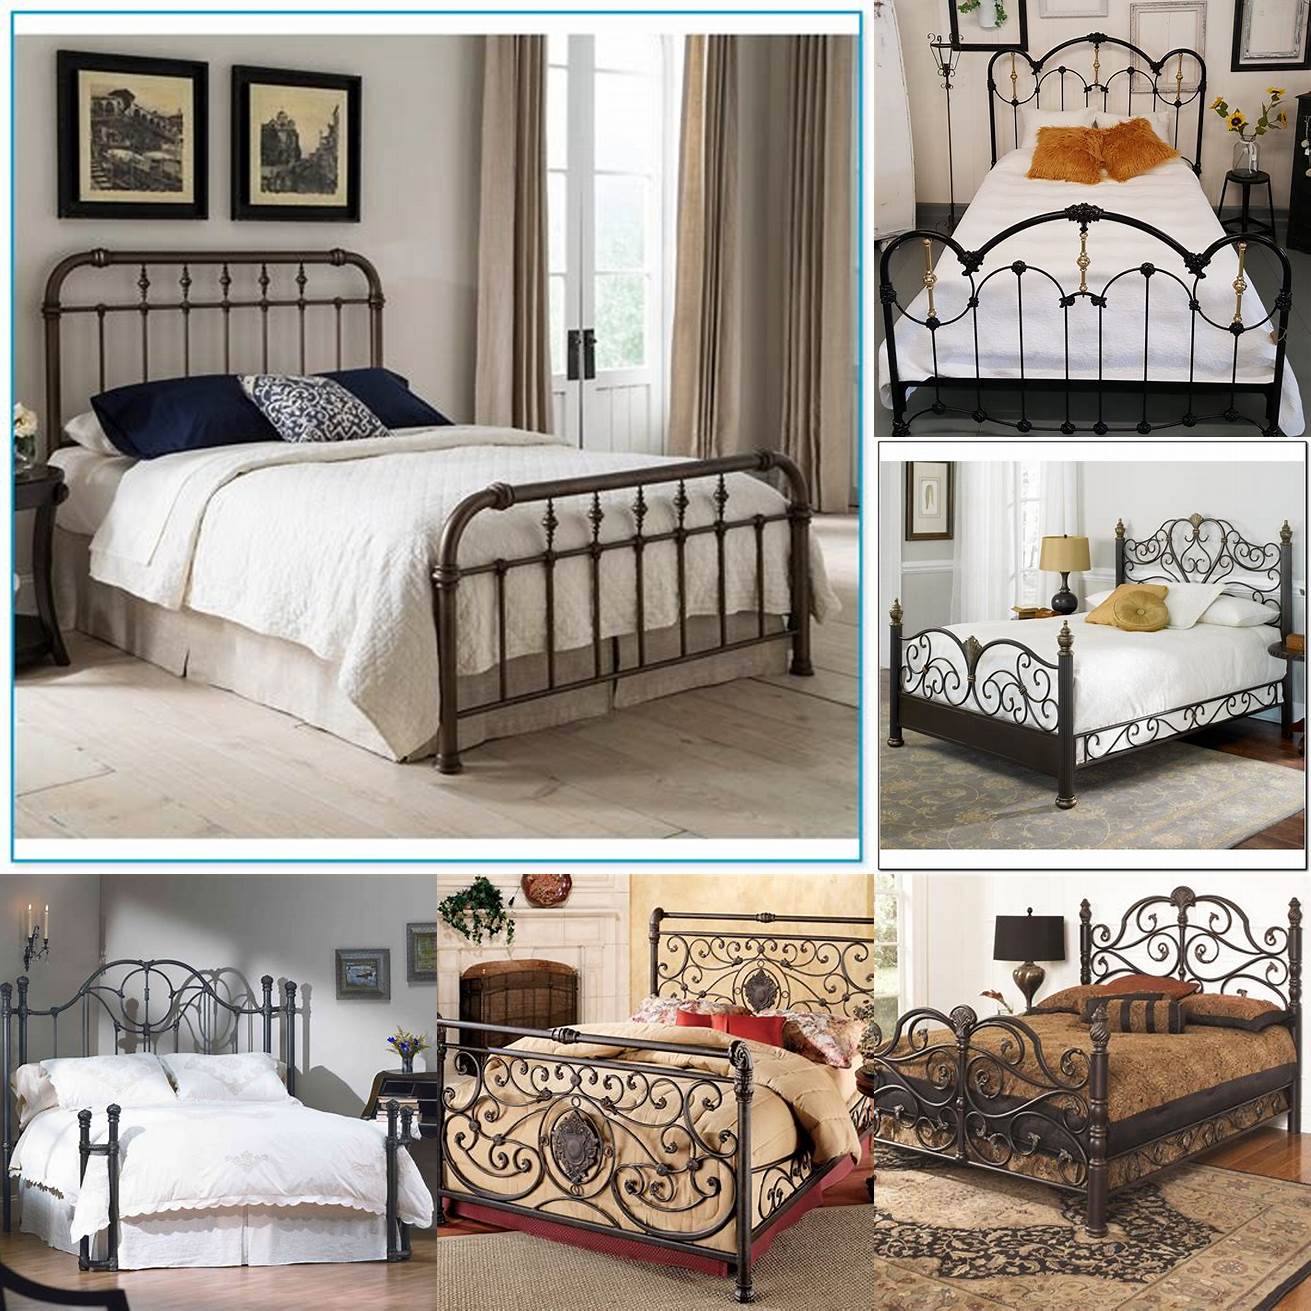 Wrought iron bed frame queen with dark bedding and bold patterns